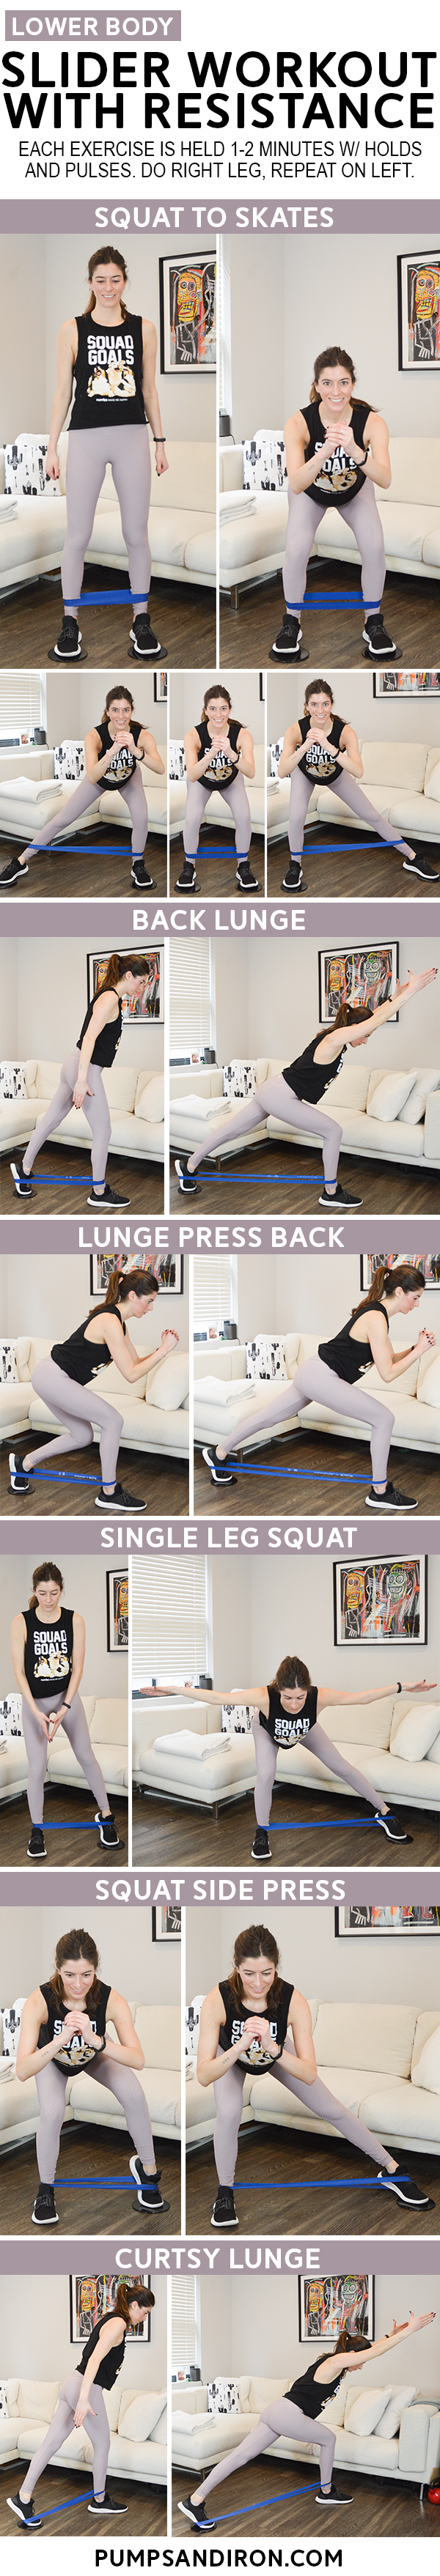 Lower Body Slider Workout with Resistance